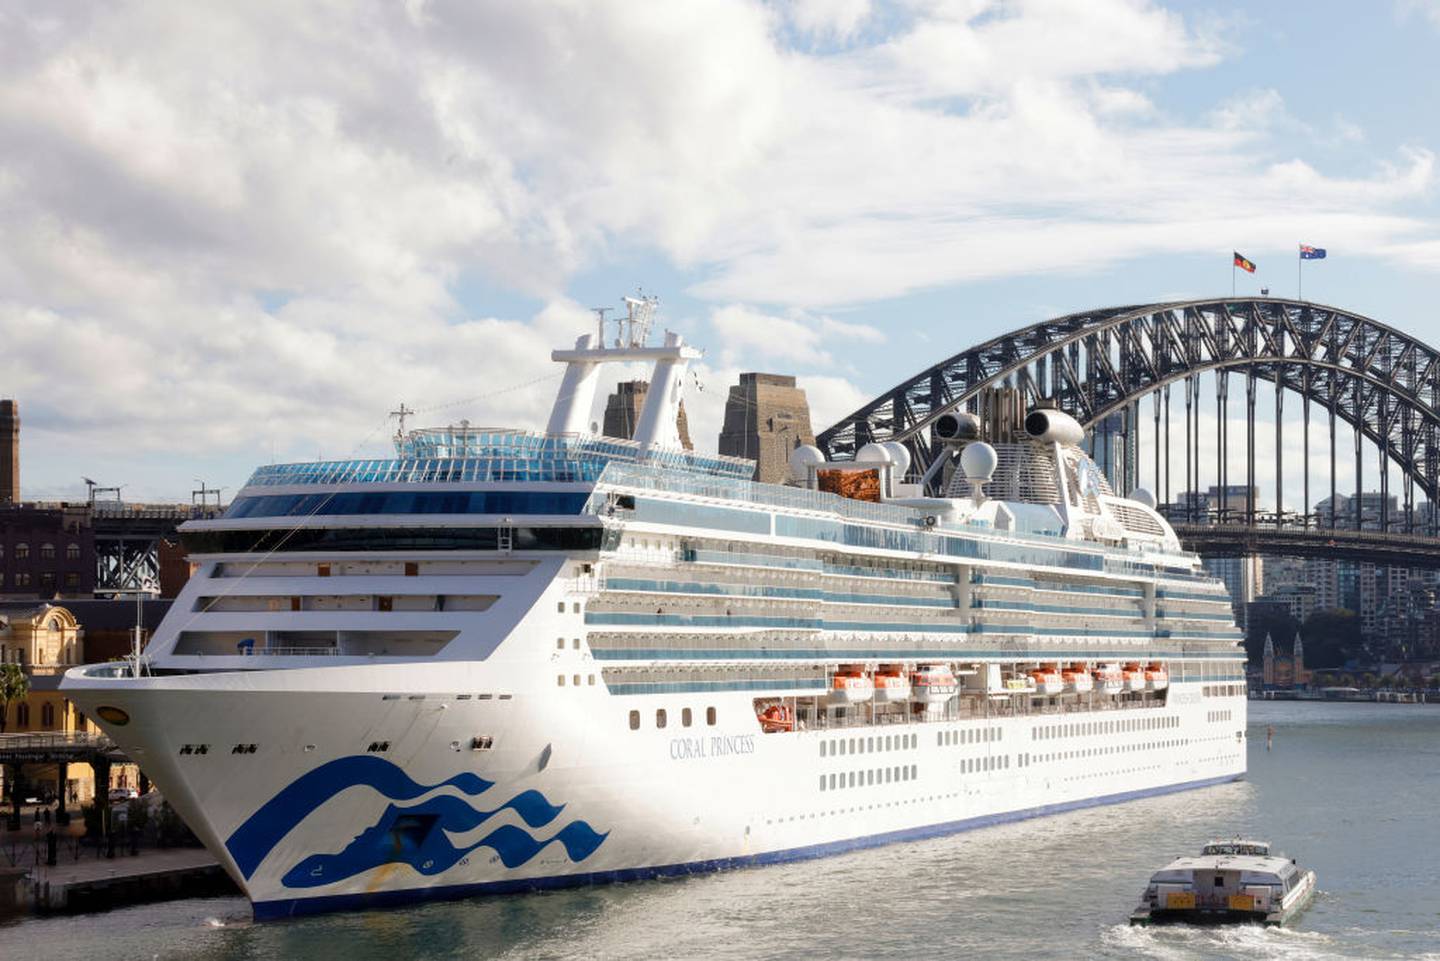 The Coral Princess docks at Circular Quay, Sydney. The Coral Princess is currently experiencing a Covid-19 outbreak. Photo / Getty Images